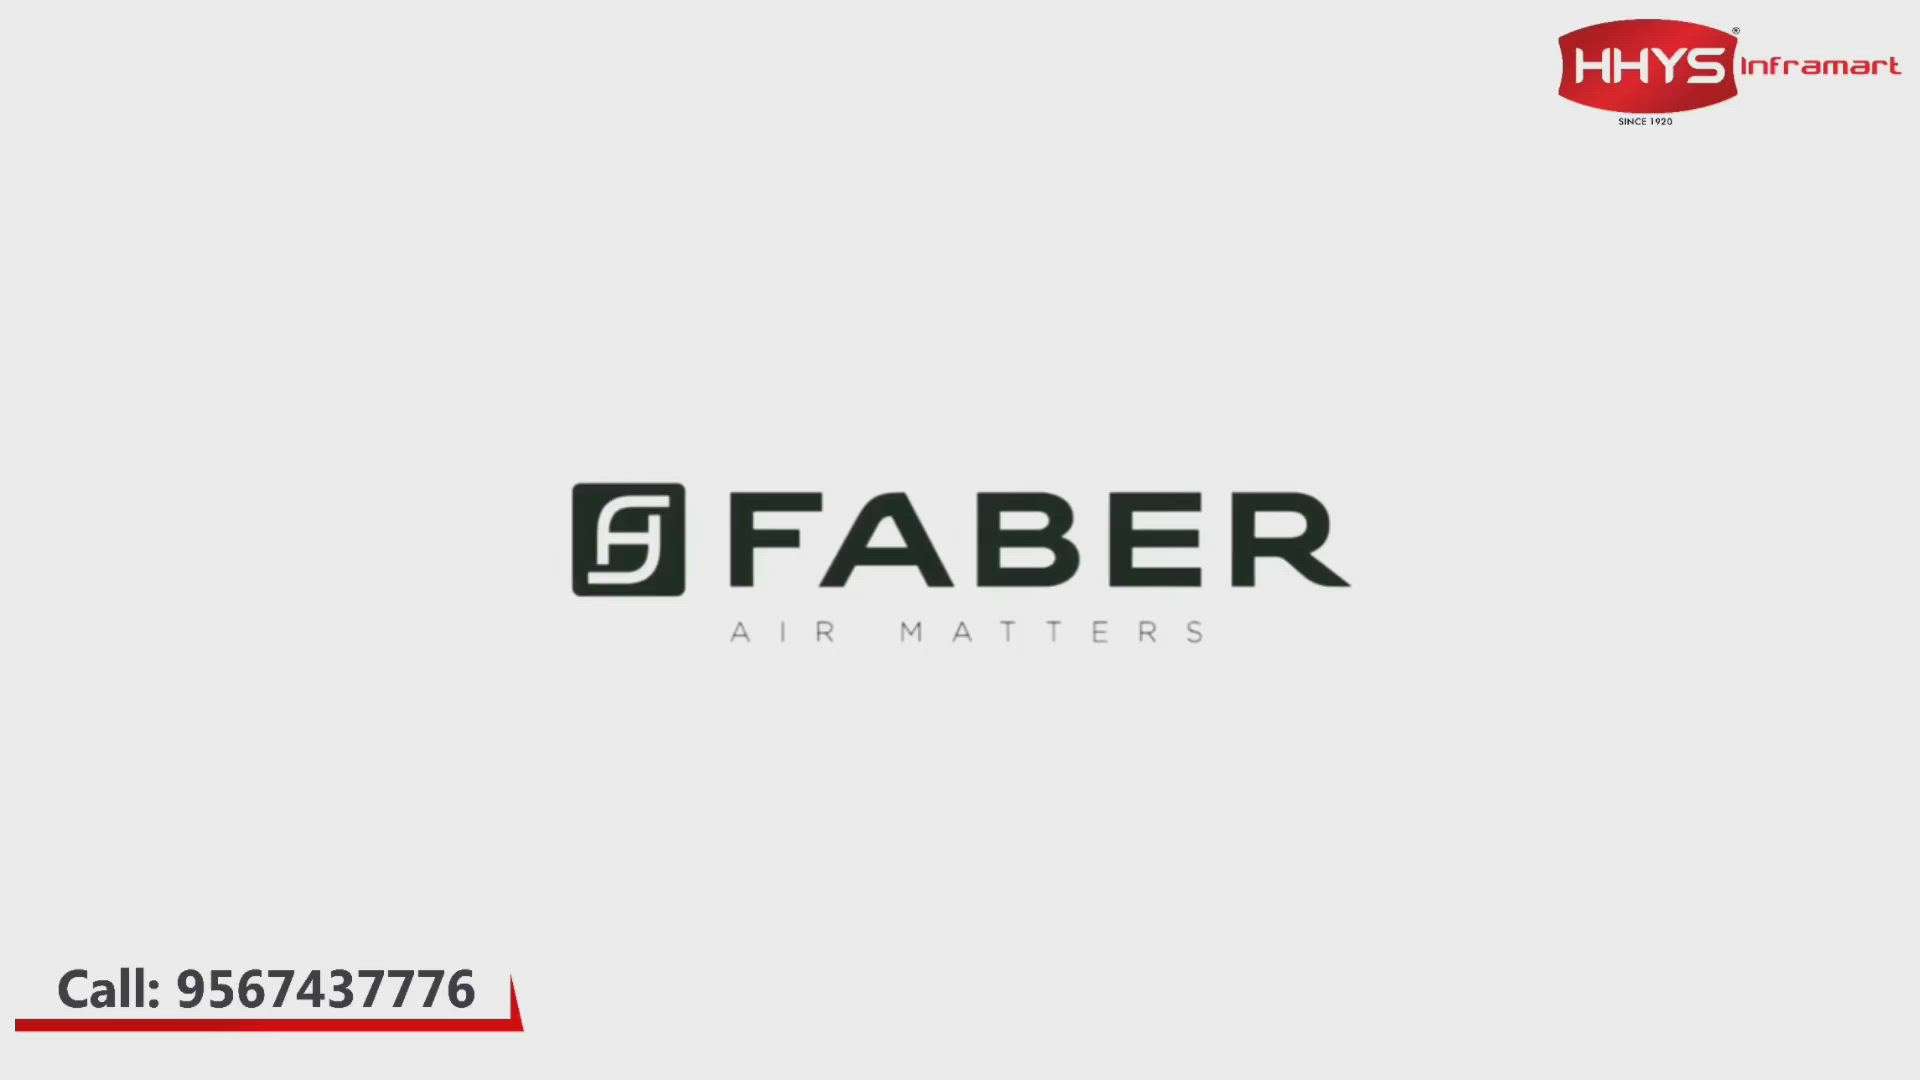 ✅ FABER AIR MATTERS

Faber Presenting the New Filters with Exclusive Filtering Technology. It Provides High Filtering & with High Effective Filtering System 95% Odour Elimination. It Comes with the 2 Layers of the High - Efficiency Filter Material & Easy to Install & Maintain.

Visit our HHYS Inframart showroom in Kayamkulam for more details.

𝖧𝖧𝖸𝖲 𝖨𝗇𝖿𝗋𝖺𝗆𝖺𝗋𝗍
𝖬𝗎𝗄𝗄𝖺𝗏𝖺𝗅𝖺 𝖩𝗇 , 𝖪𝖺𝗒𝖺𝗆𝗄𝗎𝗅𝖺𝗆
𝖠𝗅𝖾𝗉𝗉𝖾𝗒 - 690502

Call us for more Details :
+91 95674 37776.

✉️ info@hhys.in

🌐 https://hhys.in/

✔️ Whatsapp Now : https://wa.me/+919567437776

#hhys #hhysinframart #buildingmaterials #faber #faberairmatters #faberhood